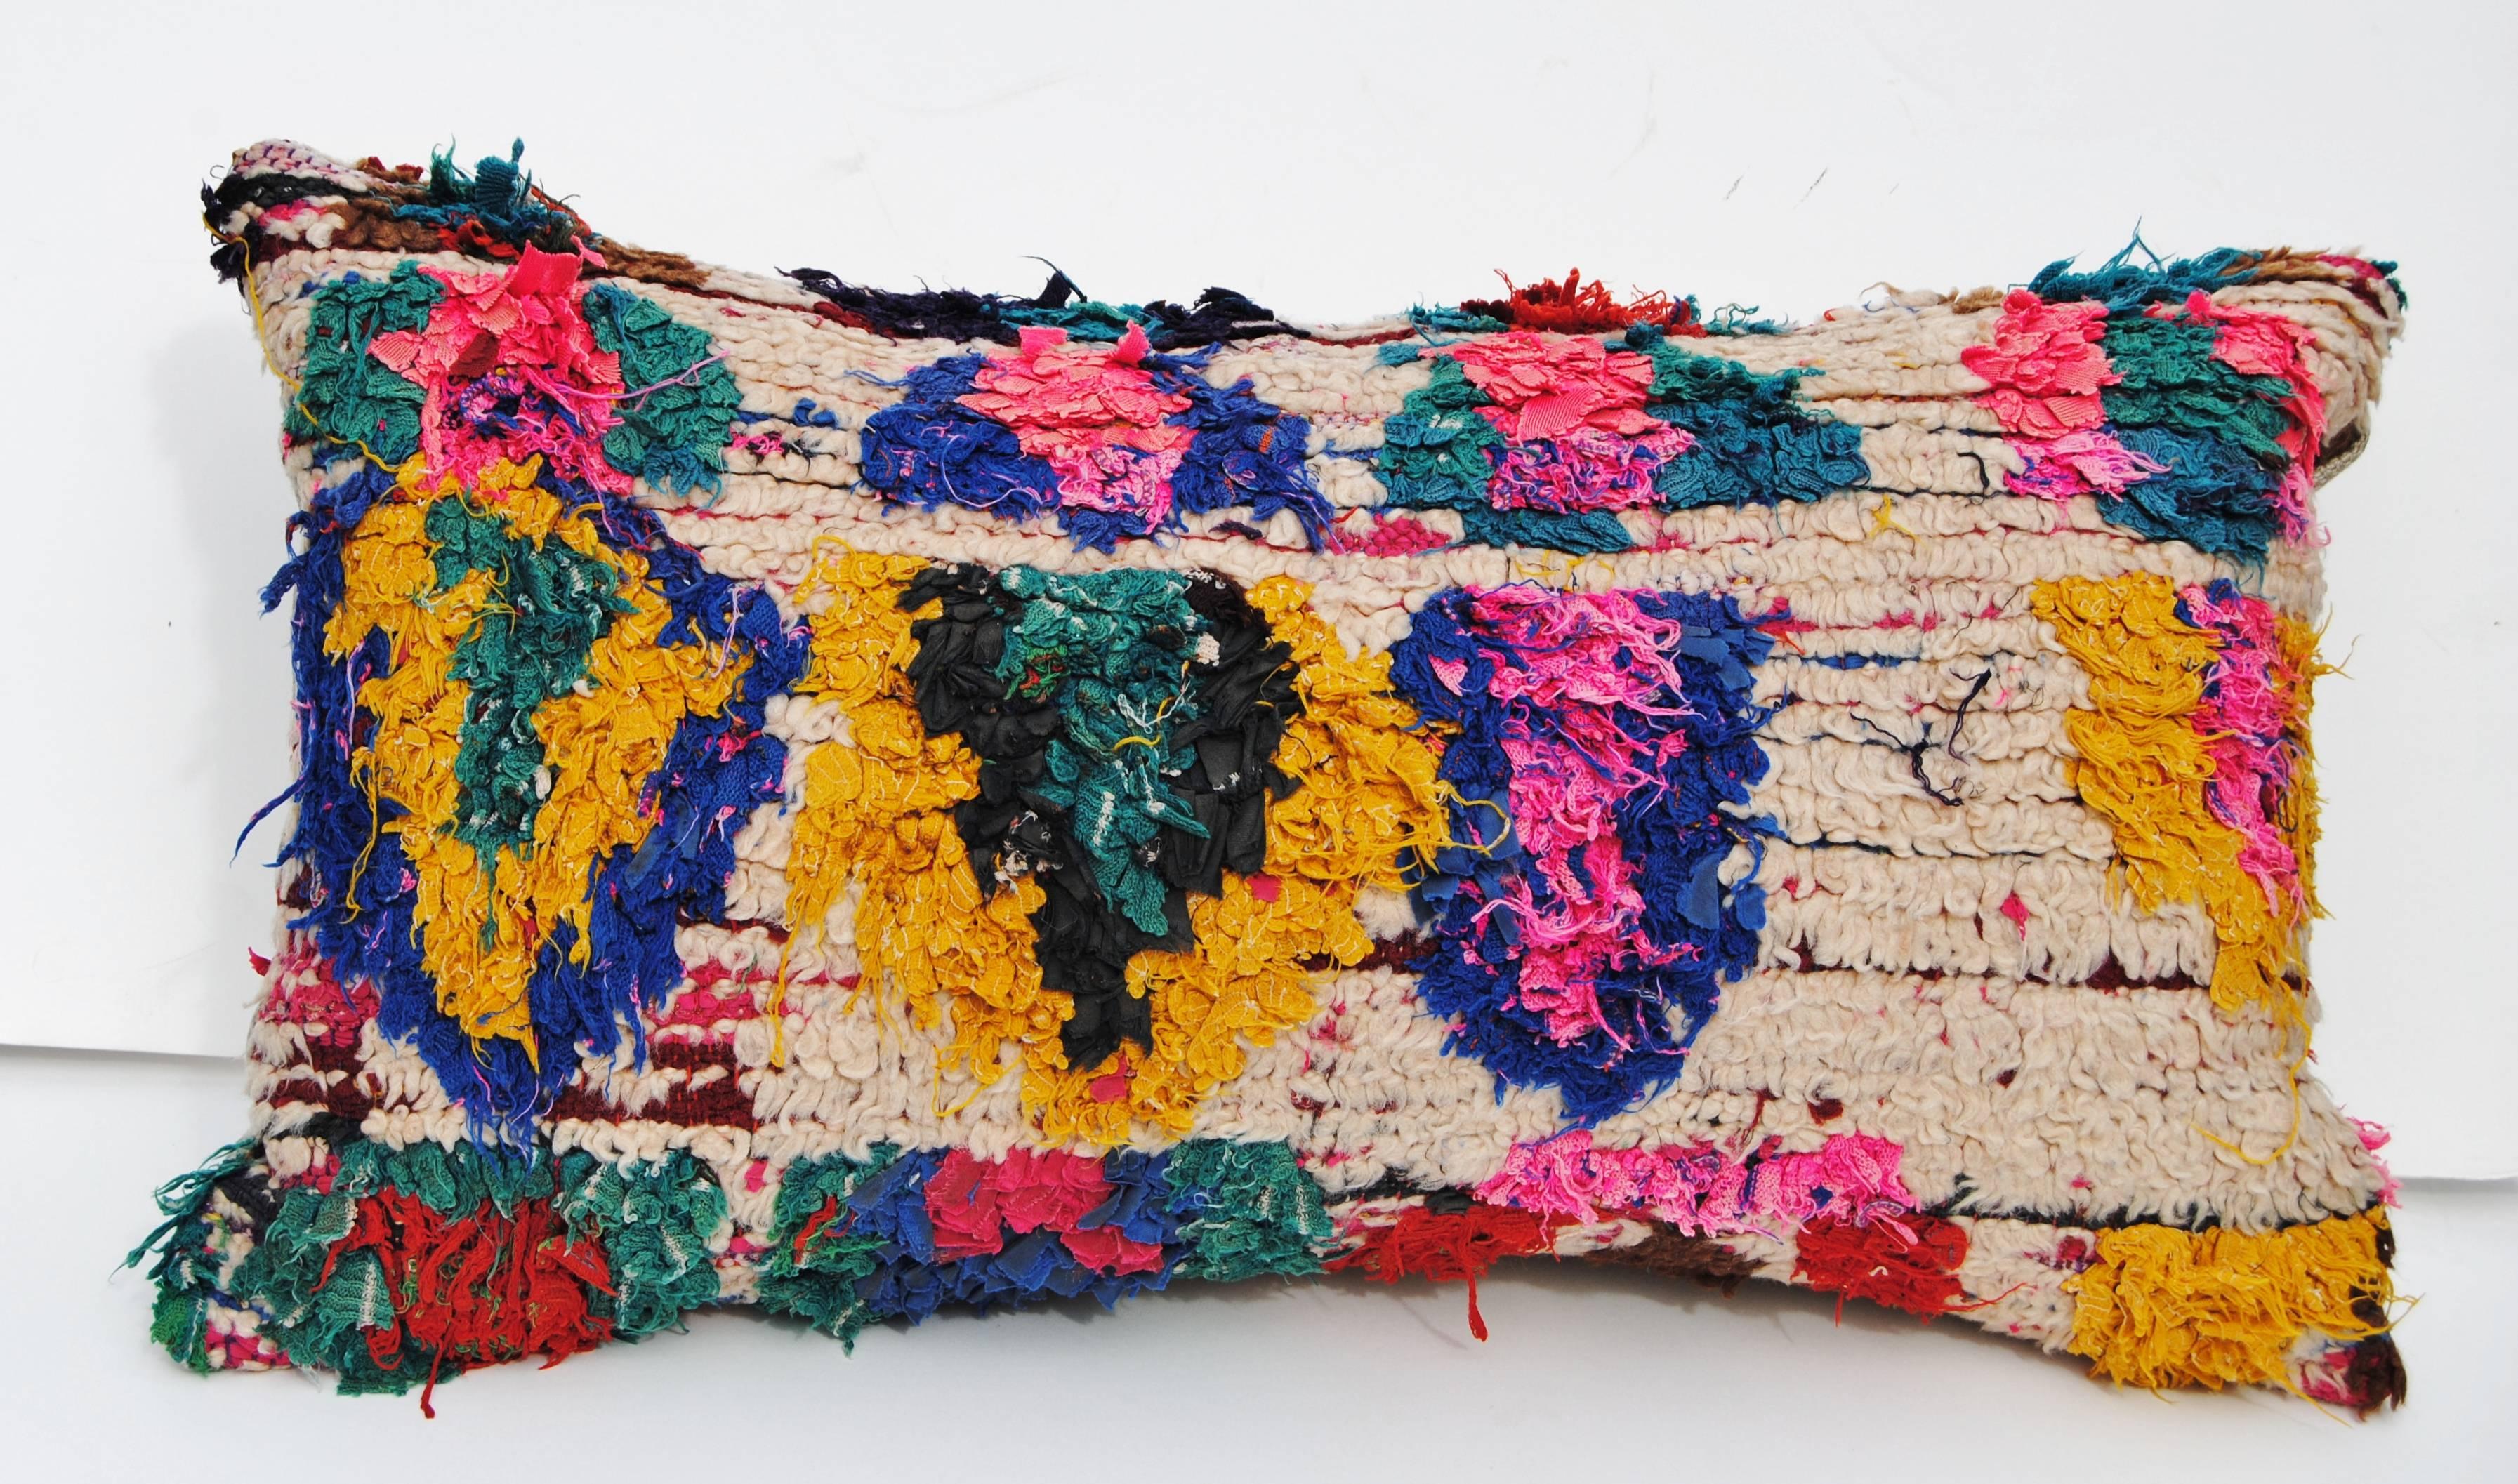 Custom pillow cut from a vintage hand loomed wool Moroccan rug from the Atlas Mountains. Flat-weave cream wool is embellished with tufted tribal designs in vivid color. Pillow is backed in linen, filled with an insert of 100% down and hand-sewn